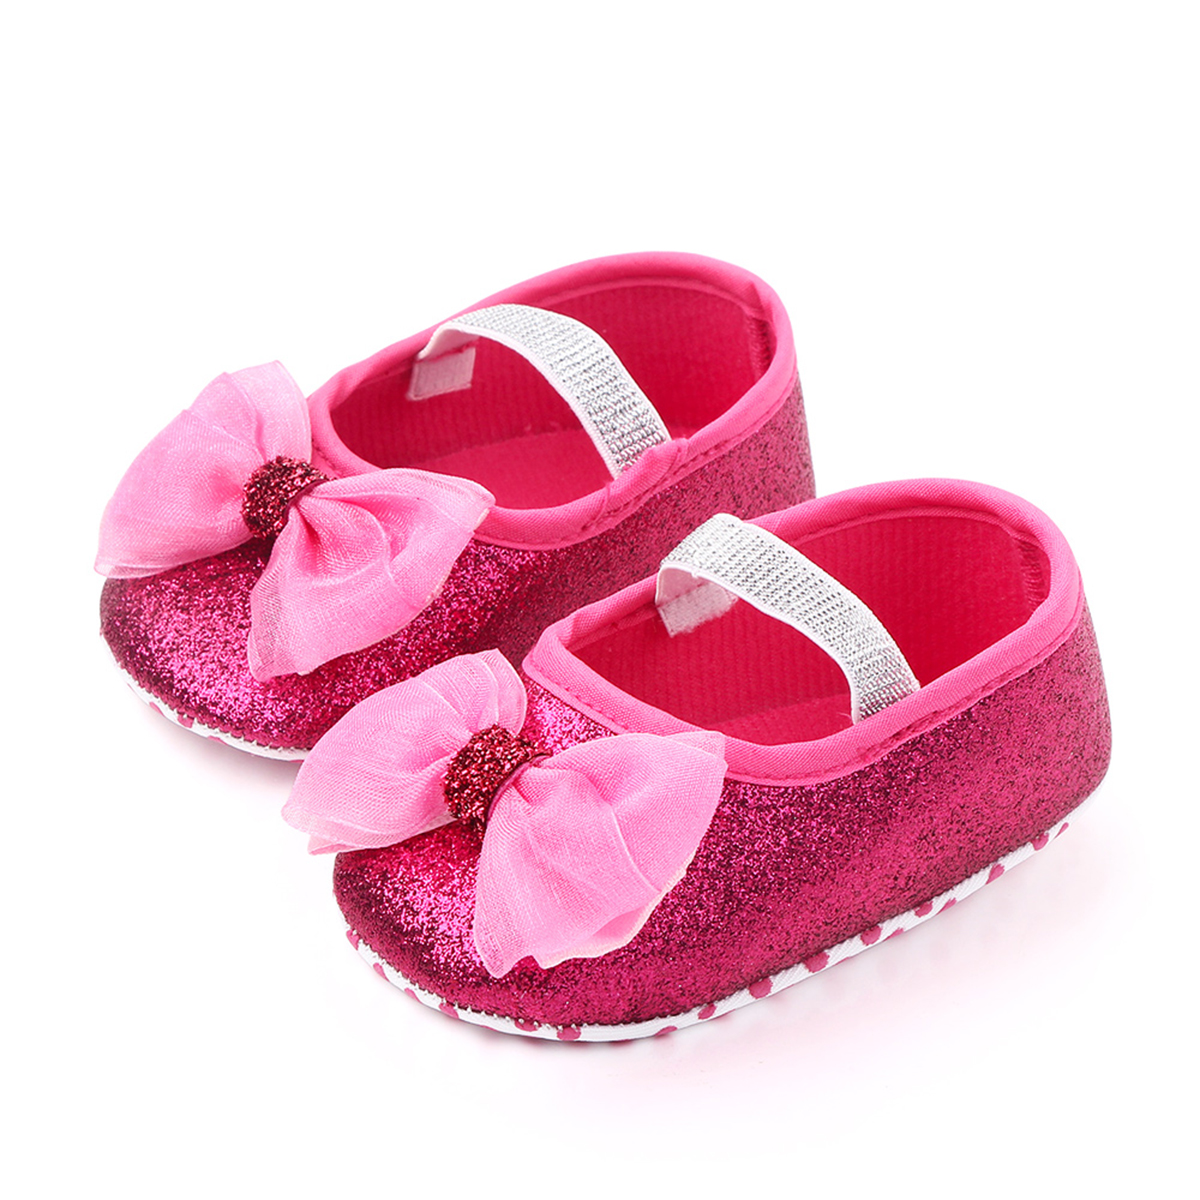 Puloru Baby Girls' Anti-Slip Sole Toddler Shoes Infant Flats Snow Boots - image 2 of 5